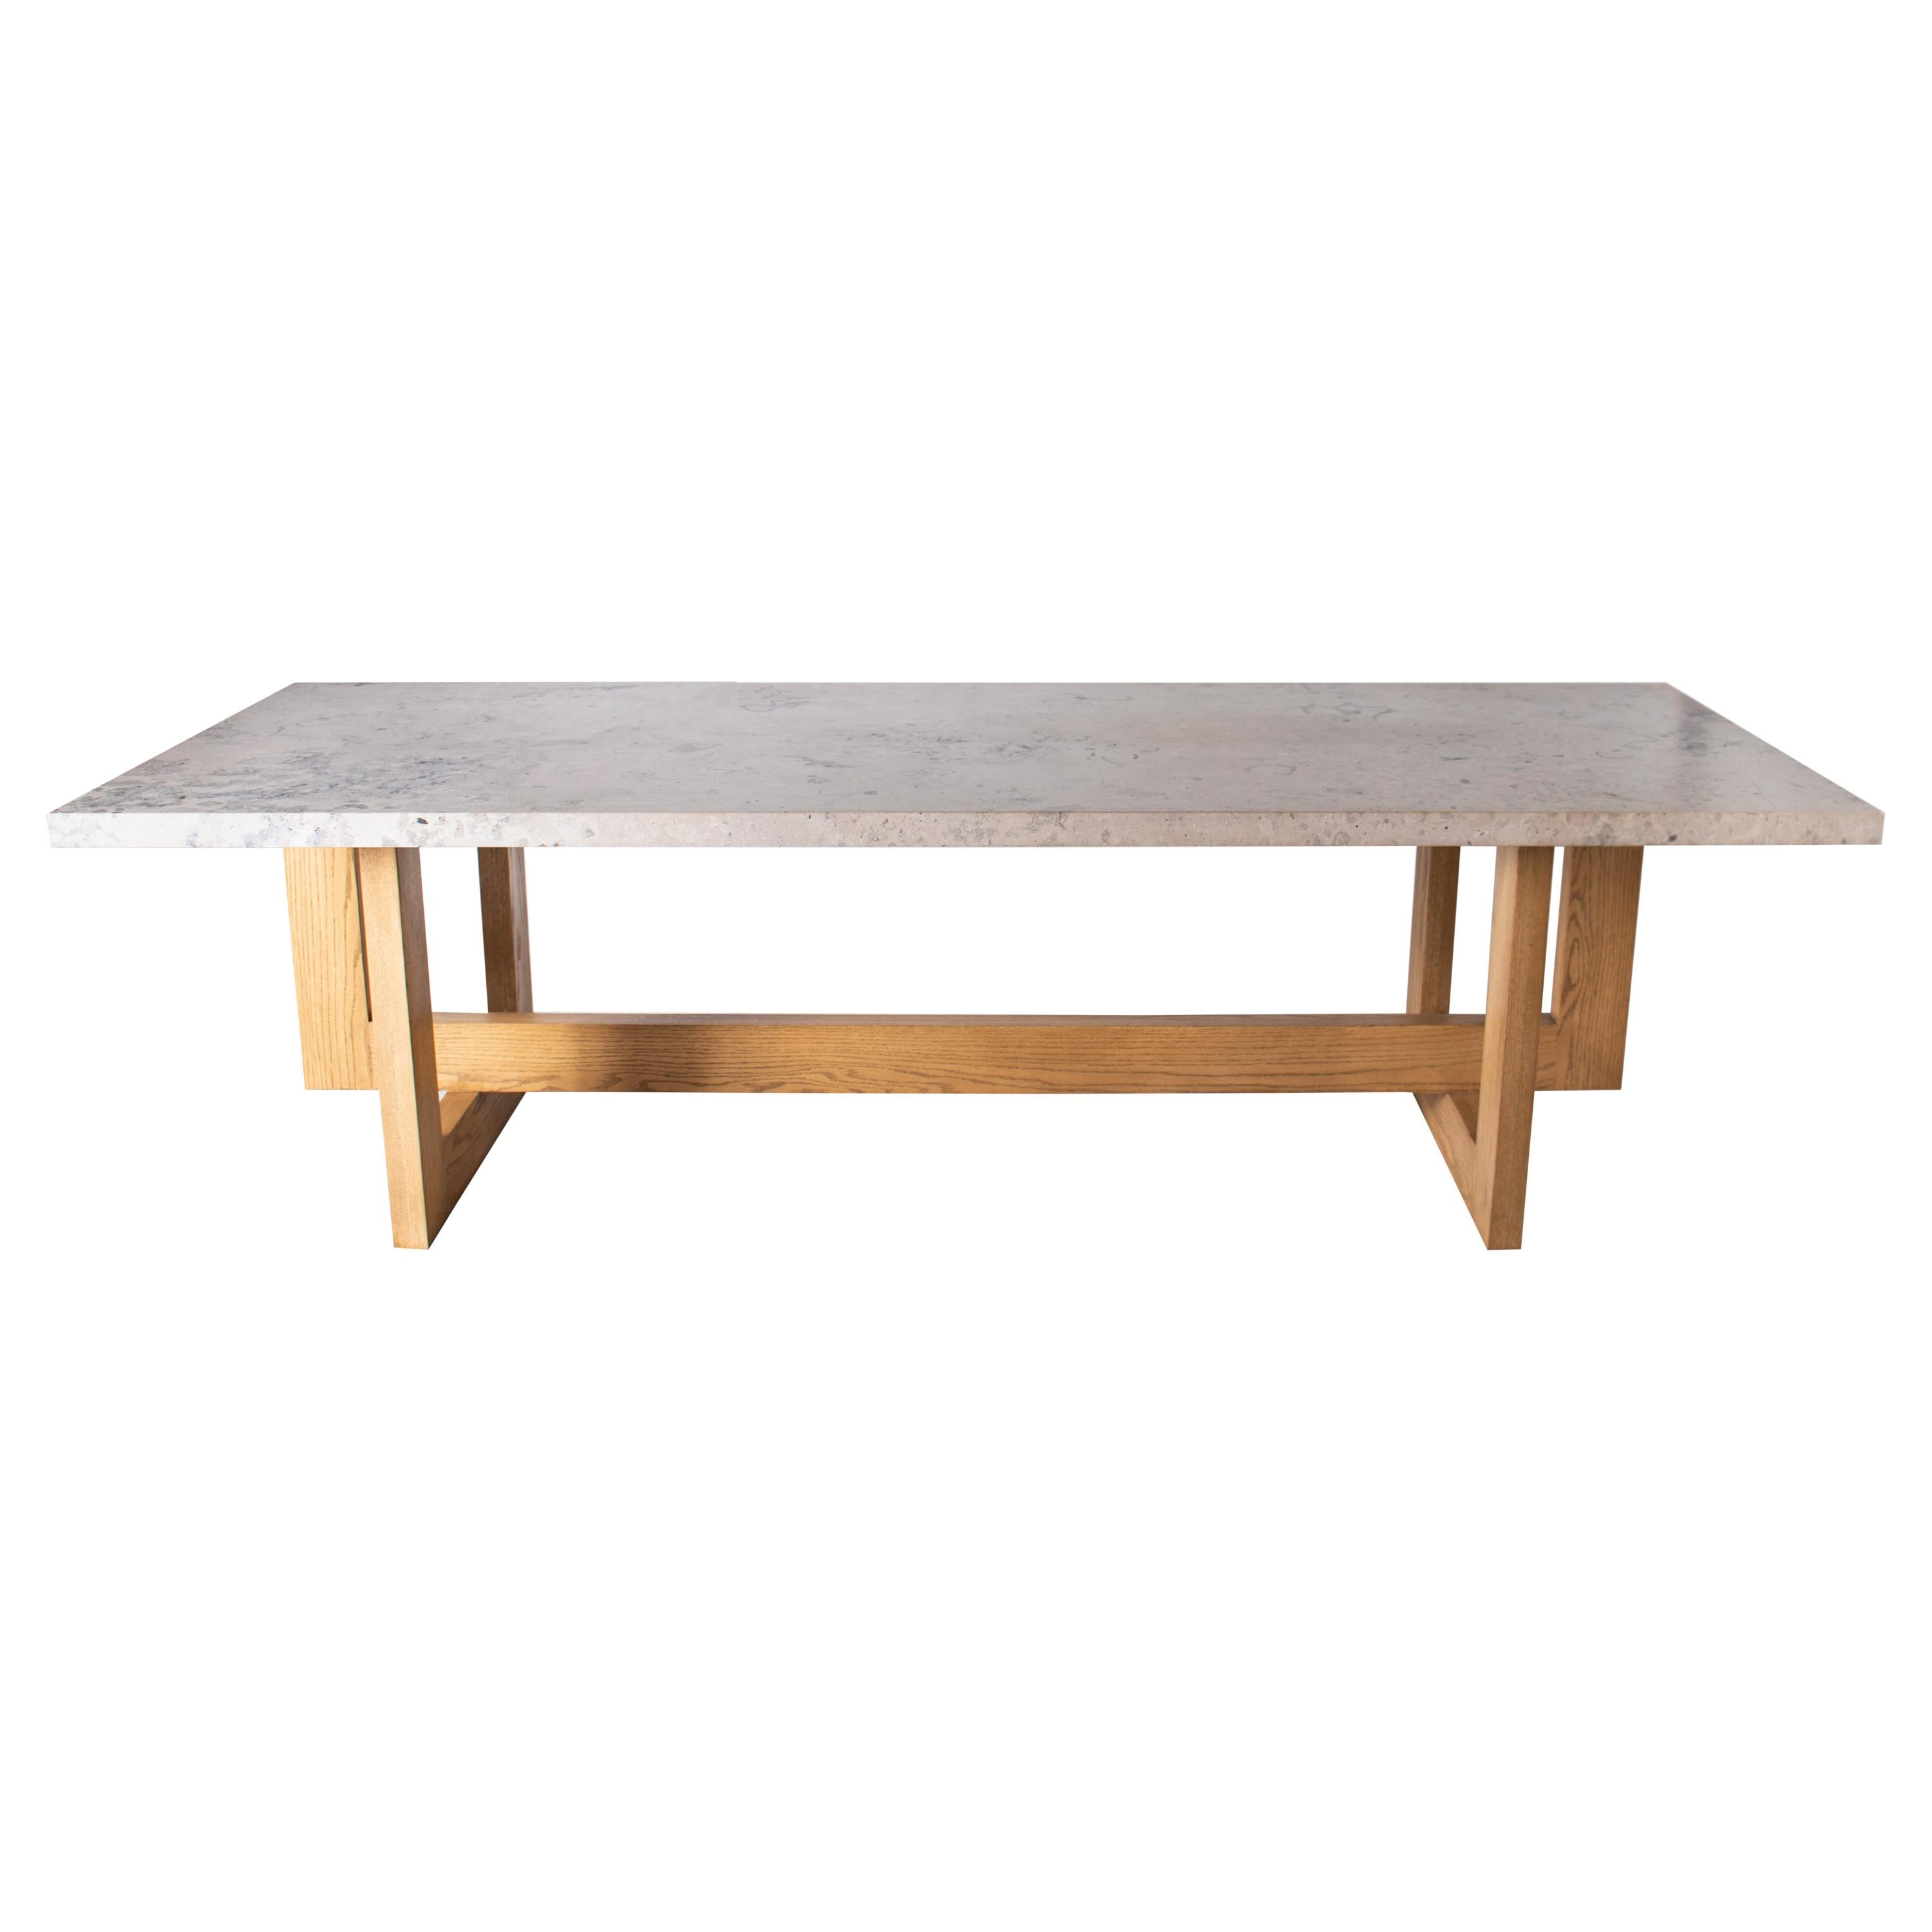 Jura Grey Marble Dining Table, with an Oak Geometric Base